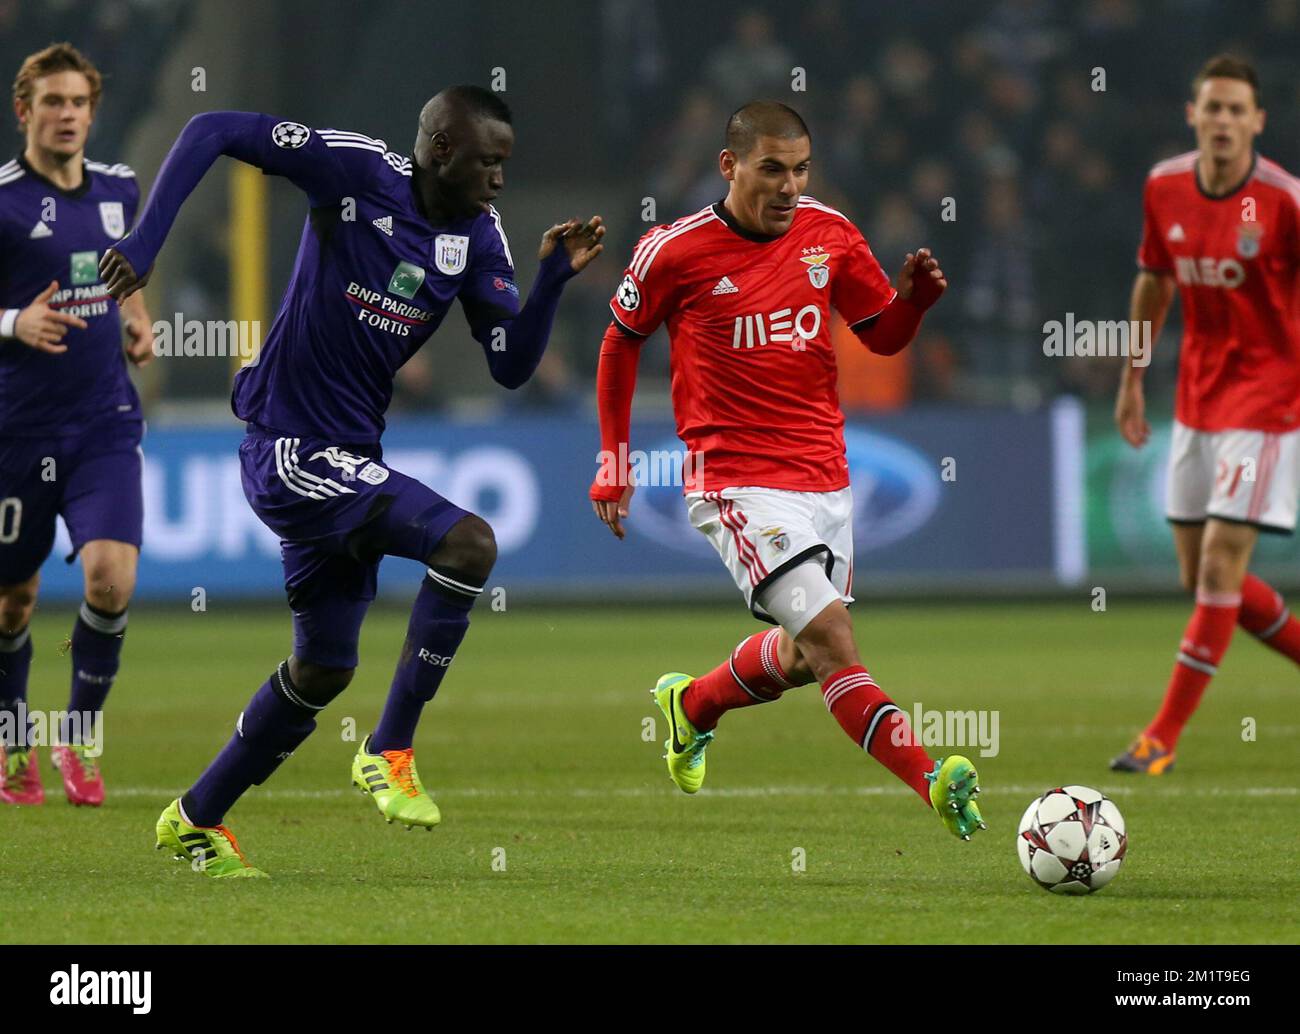 20131127 - BRUSSELS, BELGIUM: Anderlecht's Cheikhou Kouyate and Benfica's Maxi Pereira fight for the ball during the soccer game between Belgian team RSC Anderlecht and Portuguese club S.L. Benfica, the fifth match of the Champions League Group stage; in the group C, Wednesday 27 November 2013 in Brussels. BELGA PHOTO VIRGINIE LEFOUR Stock Photo